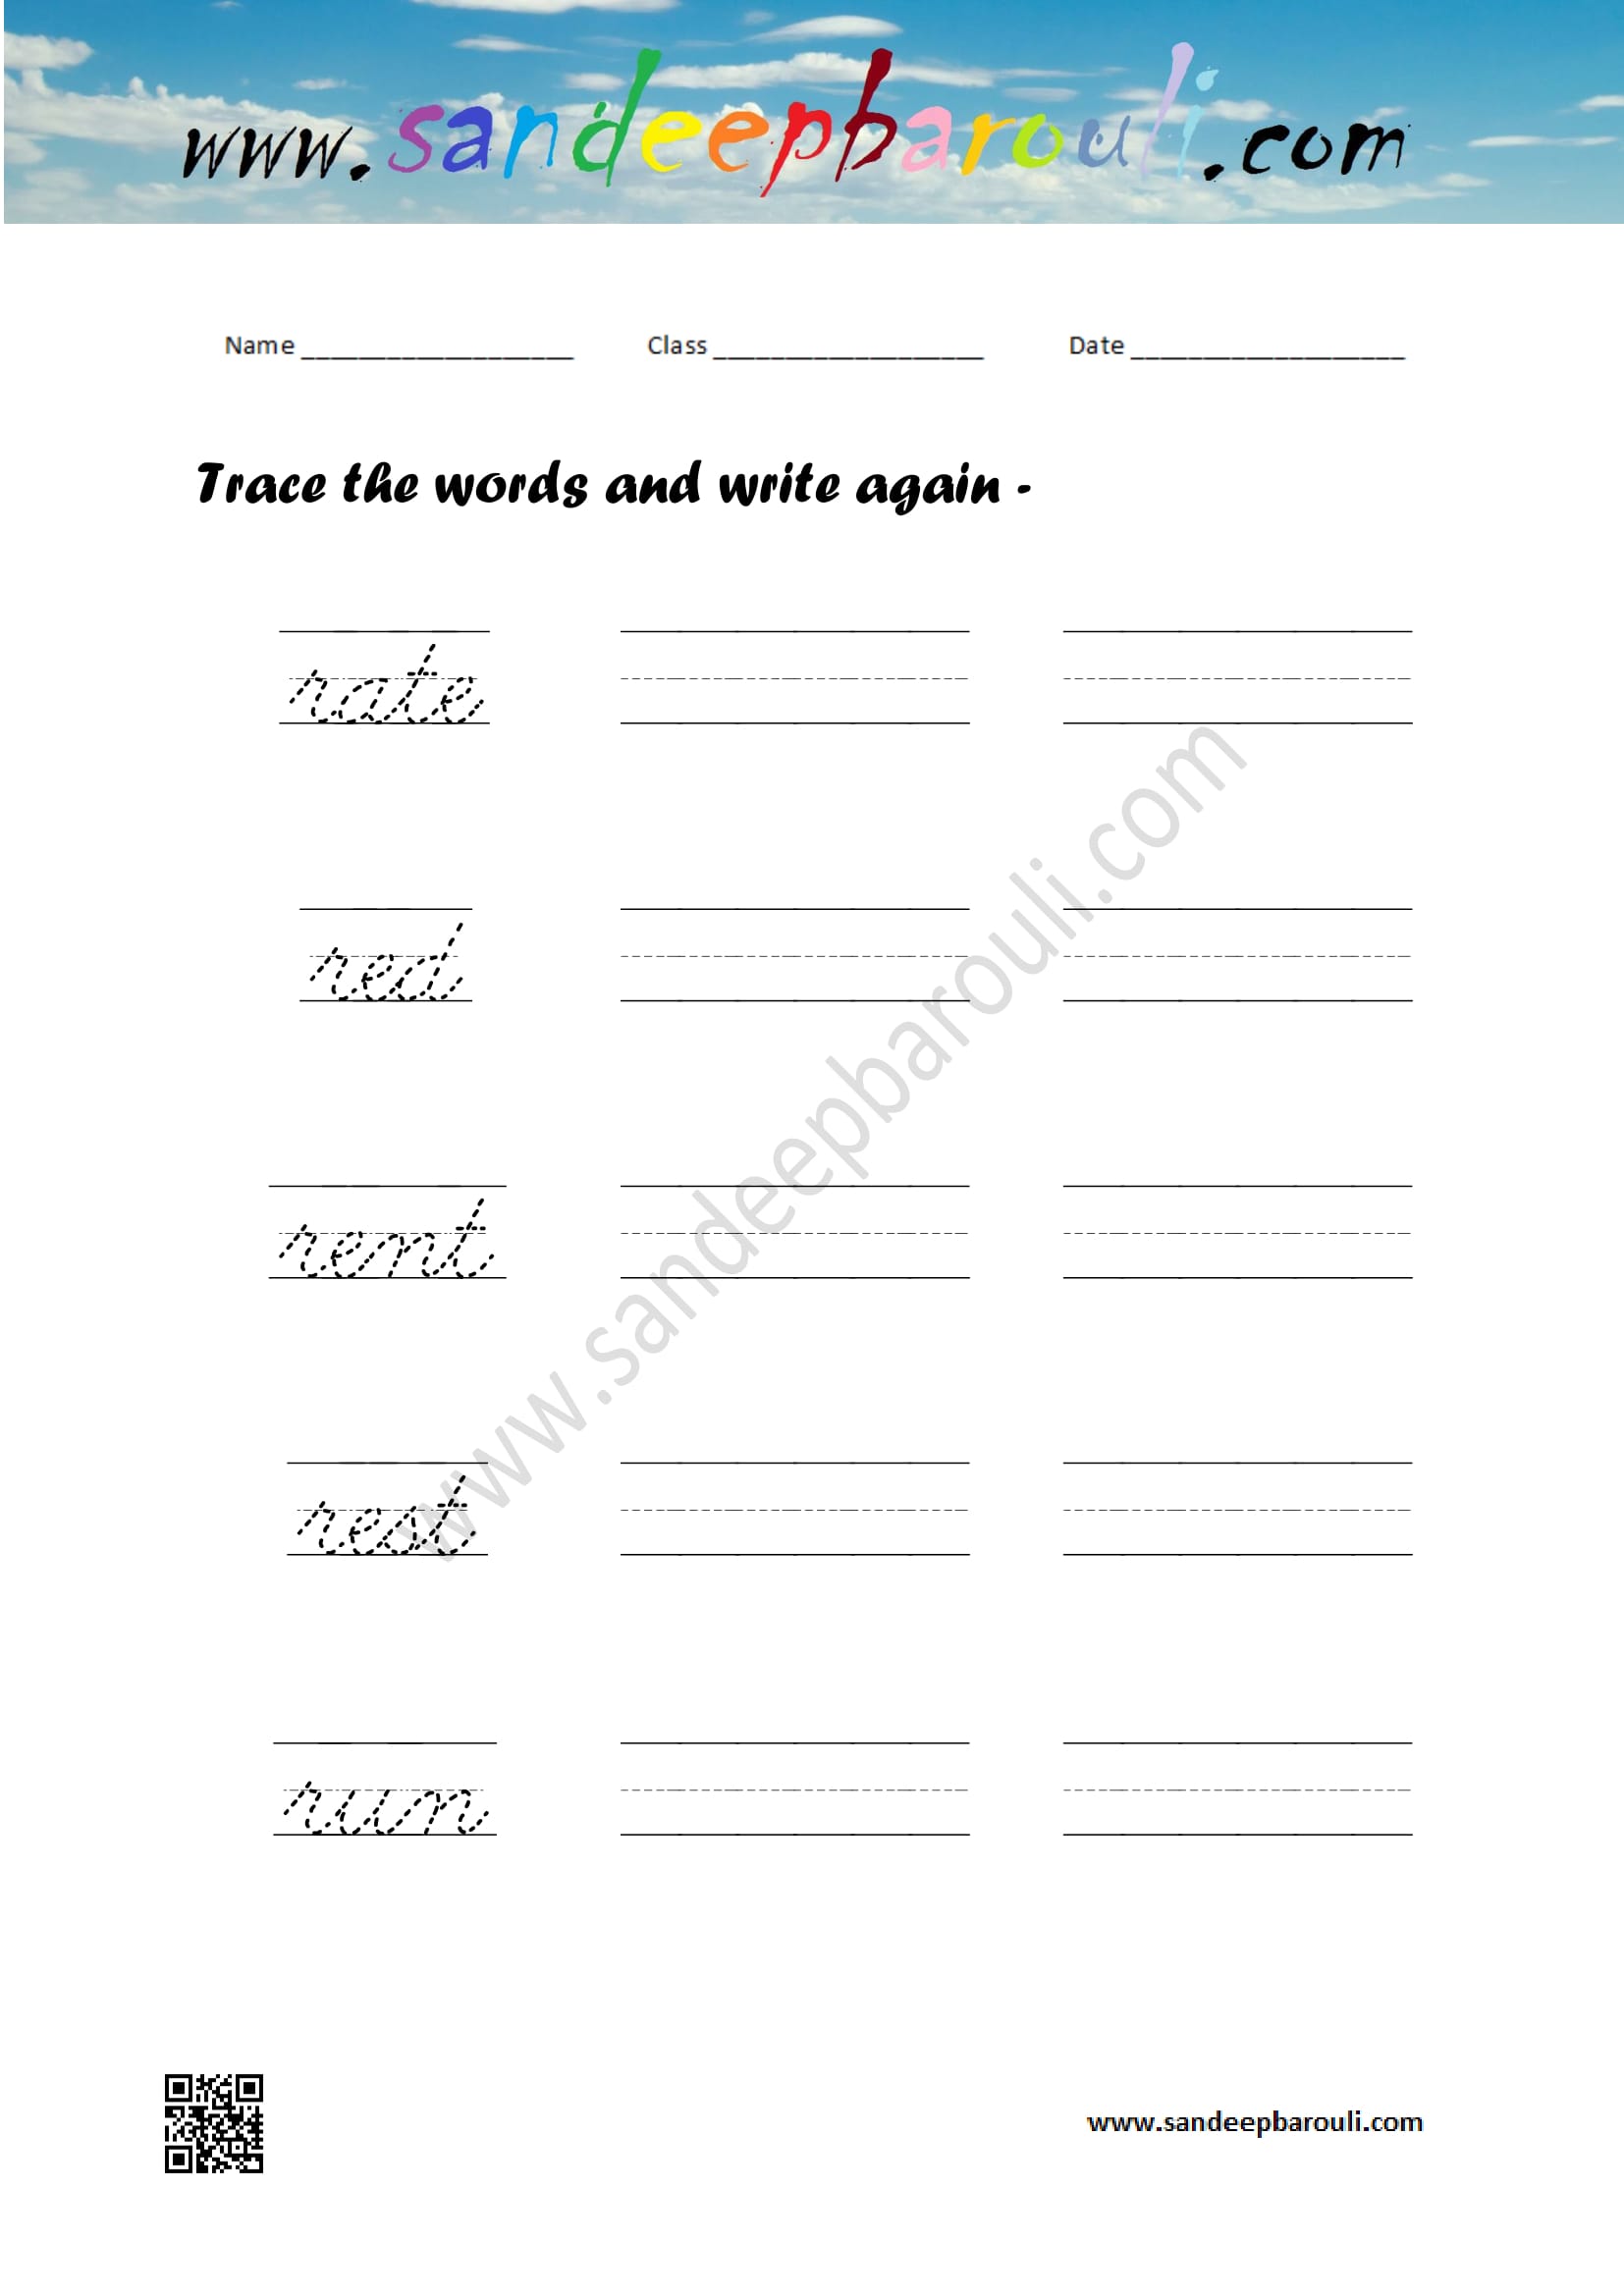 Cursive writing worksheet – trace the words and write again (21)